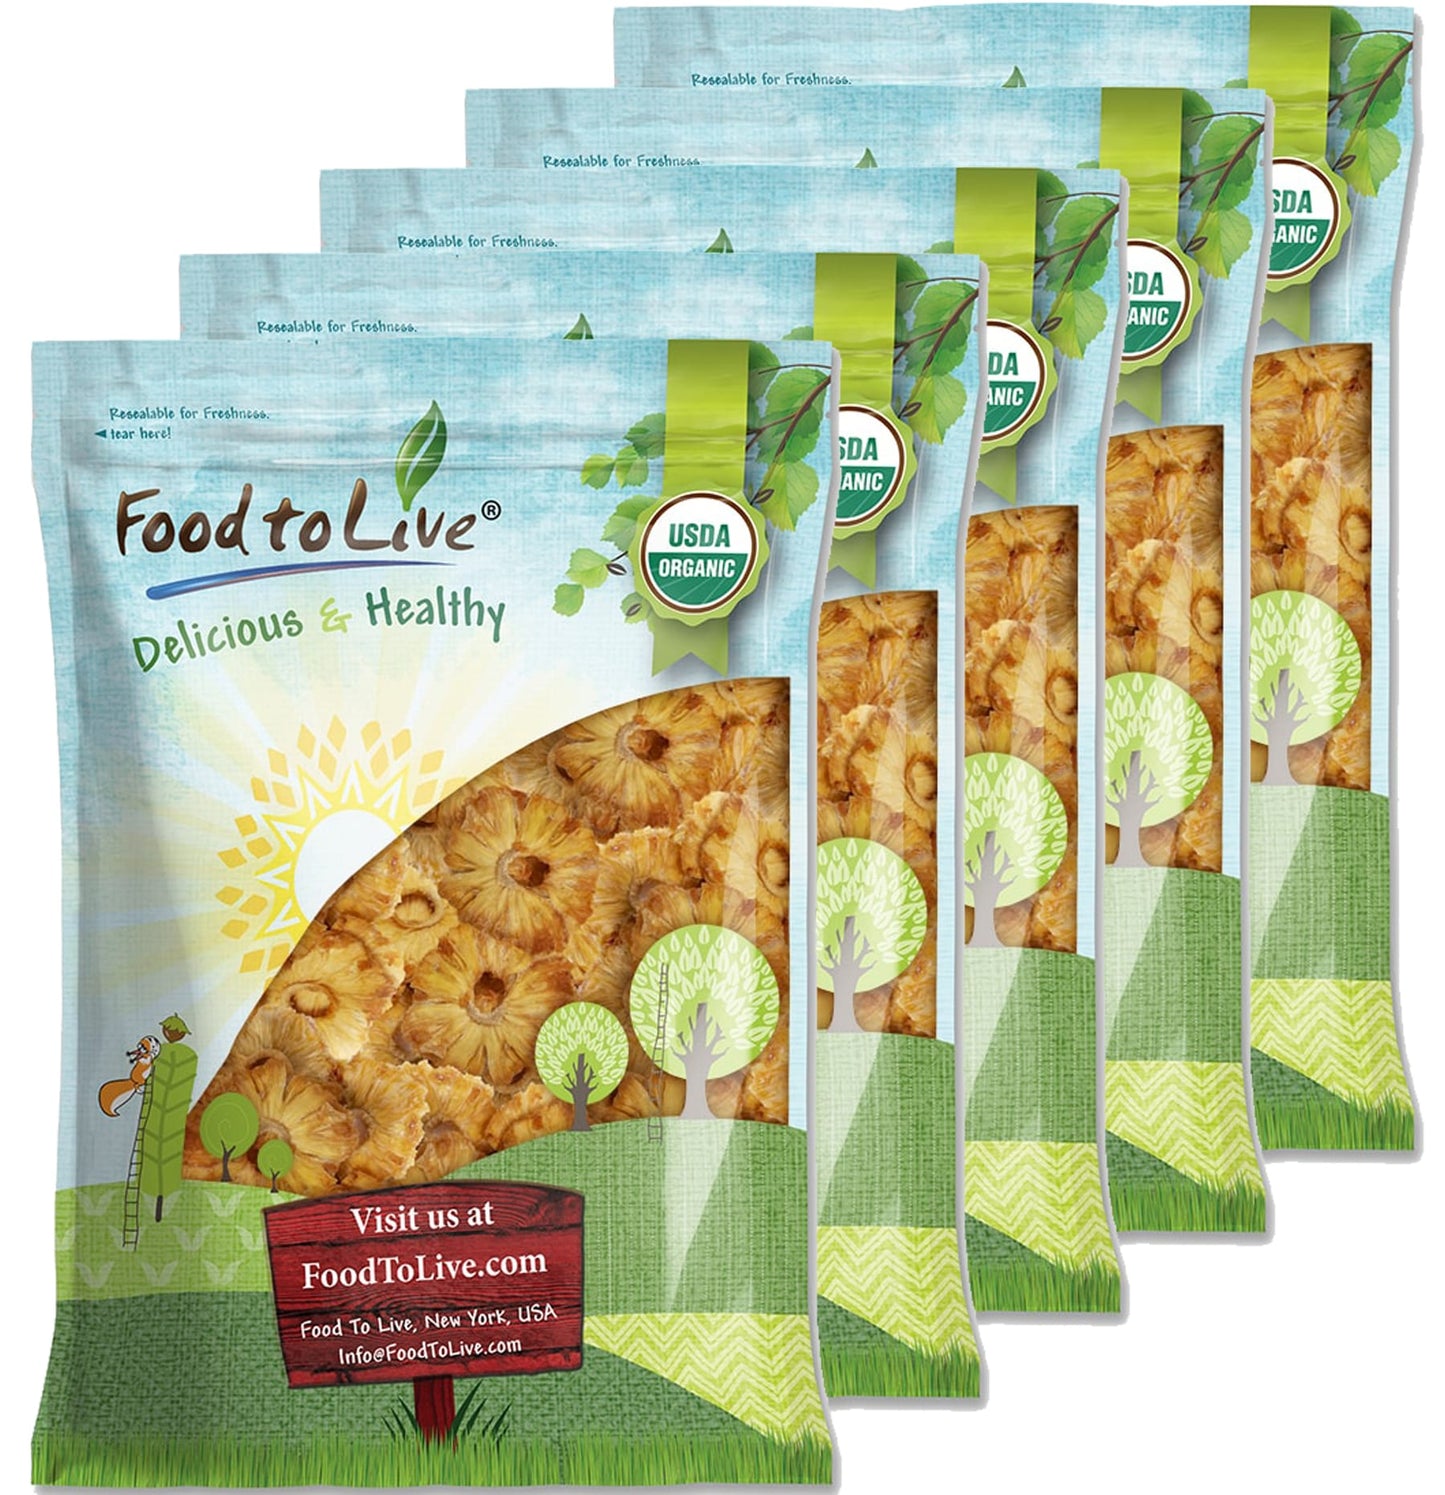 Organic Dried Pineapple Rings - Non-GMO, Flavorful Chewy Fruit Snack, Vegan, Unsulfured, No Sugar Added, Bulk, Great Addition to Desserts, Cakes, and Pies, No Sulphites, Unsweetened - by Food to Live